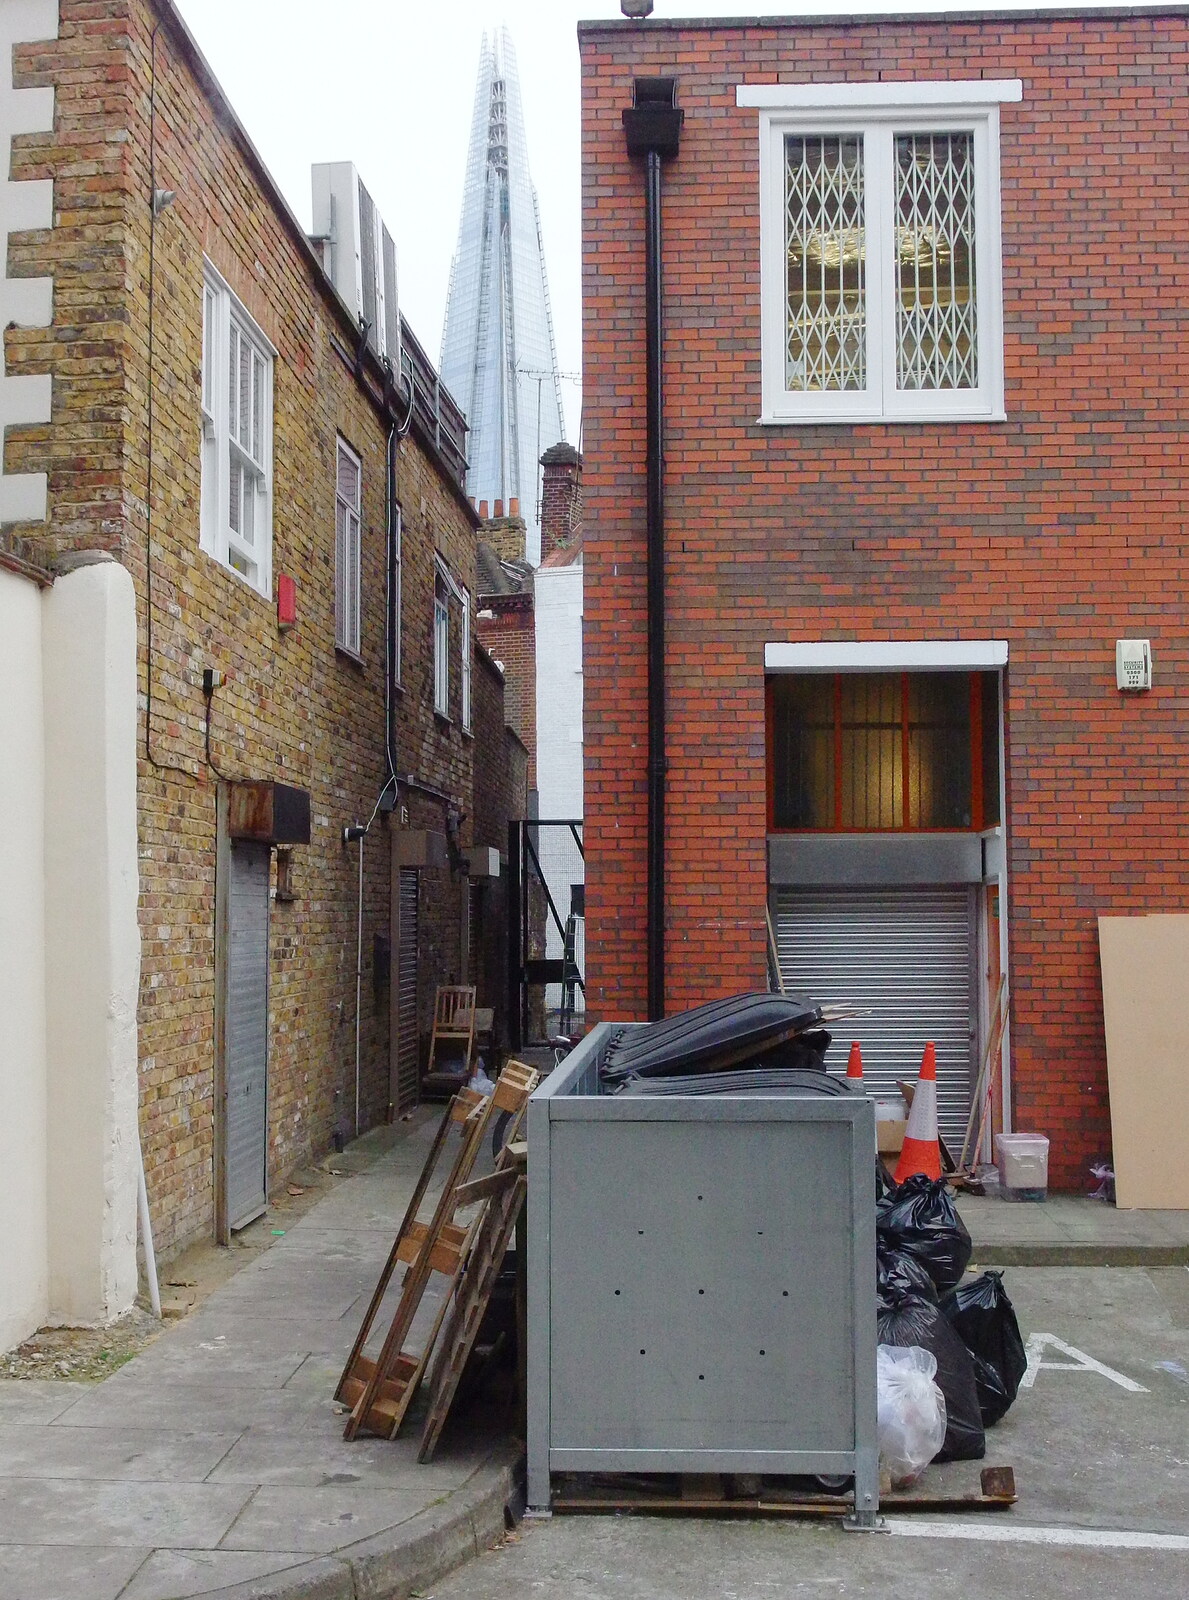 A pile of junk in Flatiron Yard from SwiftKey's Arcade Cabinet, and the Streets of Southwark, London - 5th December 2013